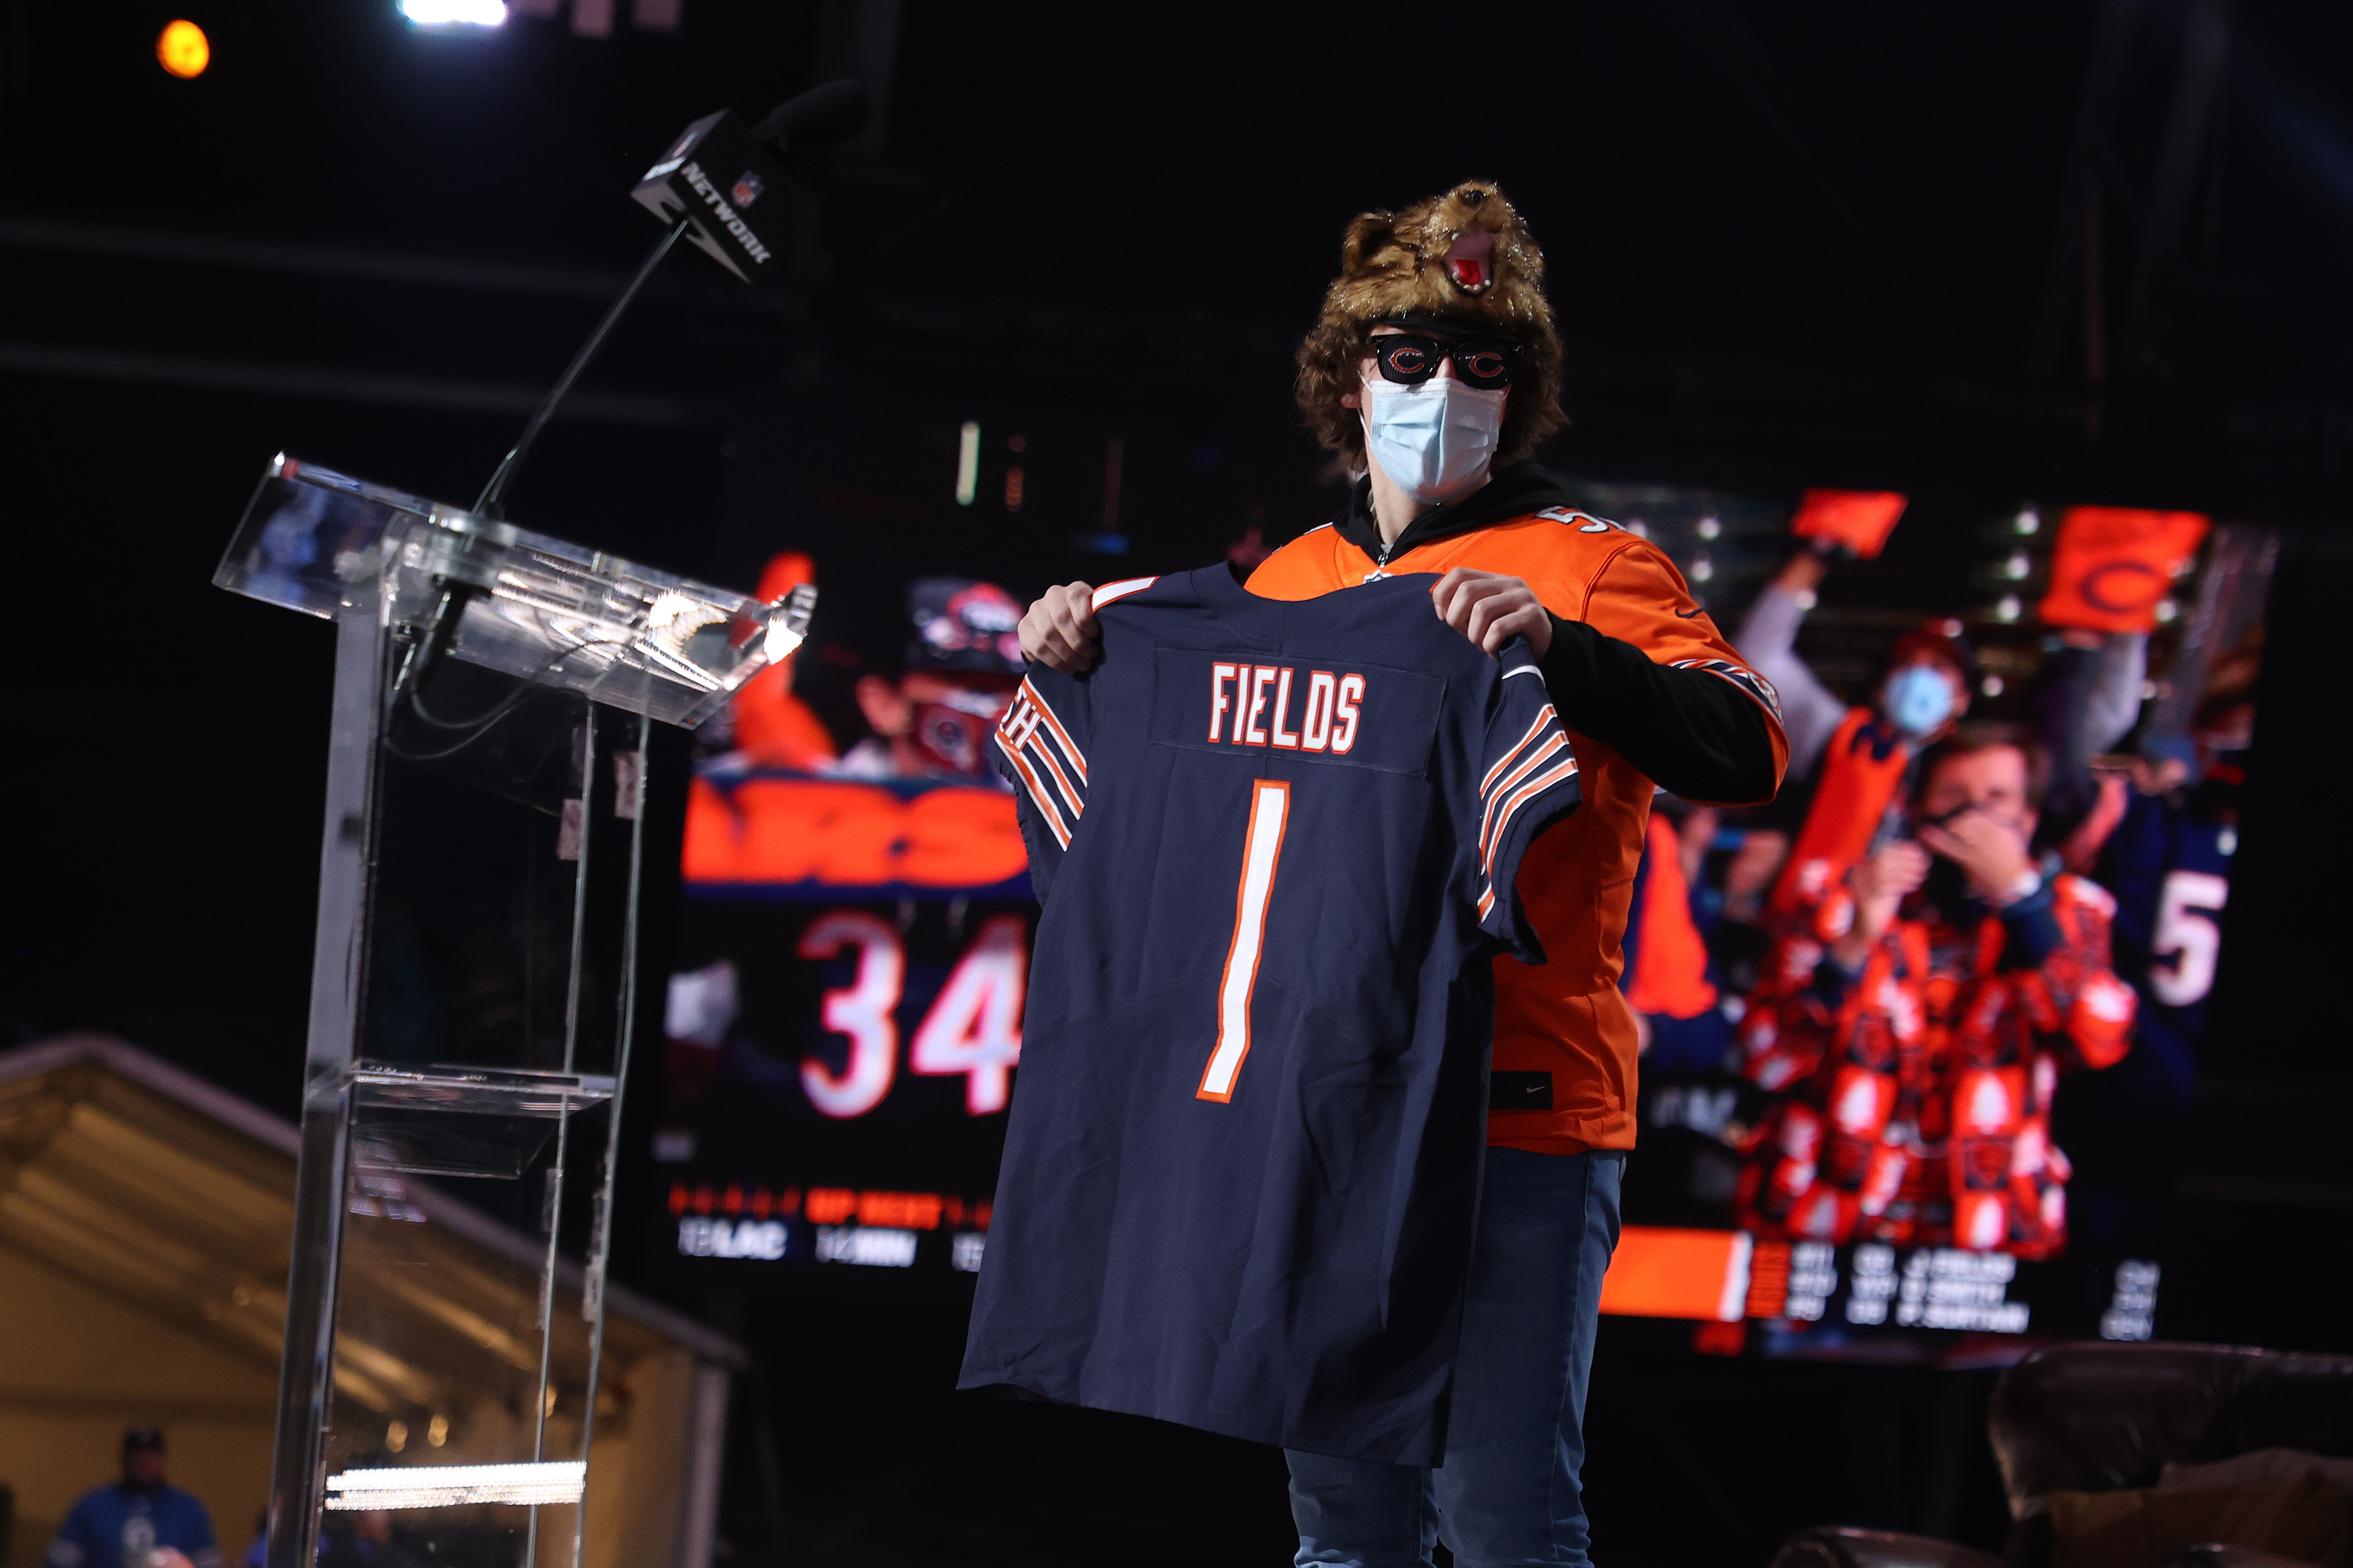 A fan holds a jersey after NFL Commissioner Roger Goodell announced Justin Fields being selected by the Chicago Bears during round one of the 2021 NFL Draft at the Great Lakes Science Center on April 29, 2021 in Cleveland, Ohio.